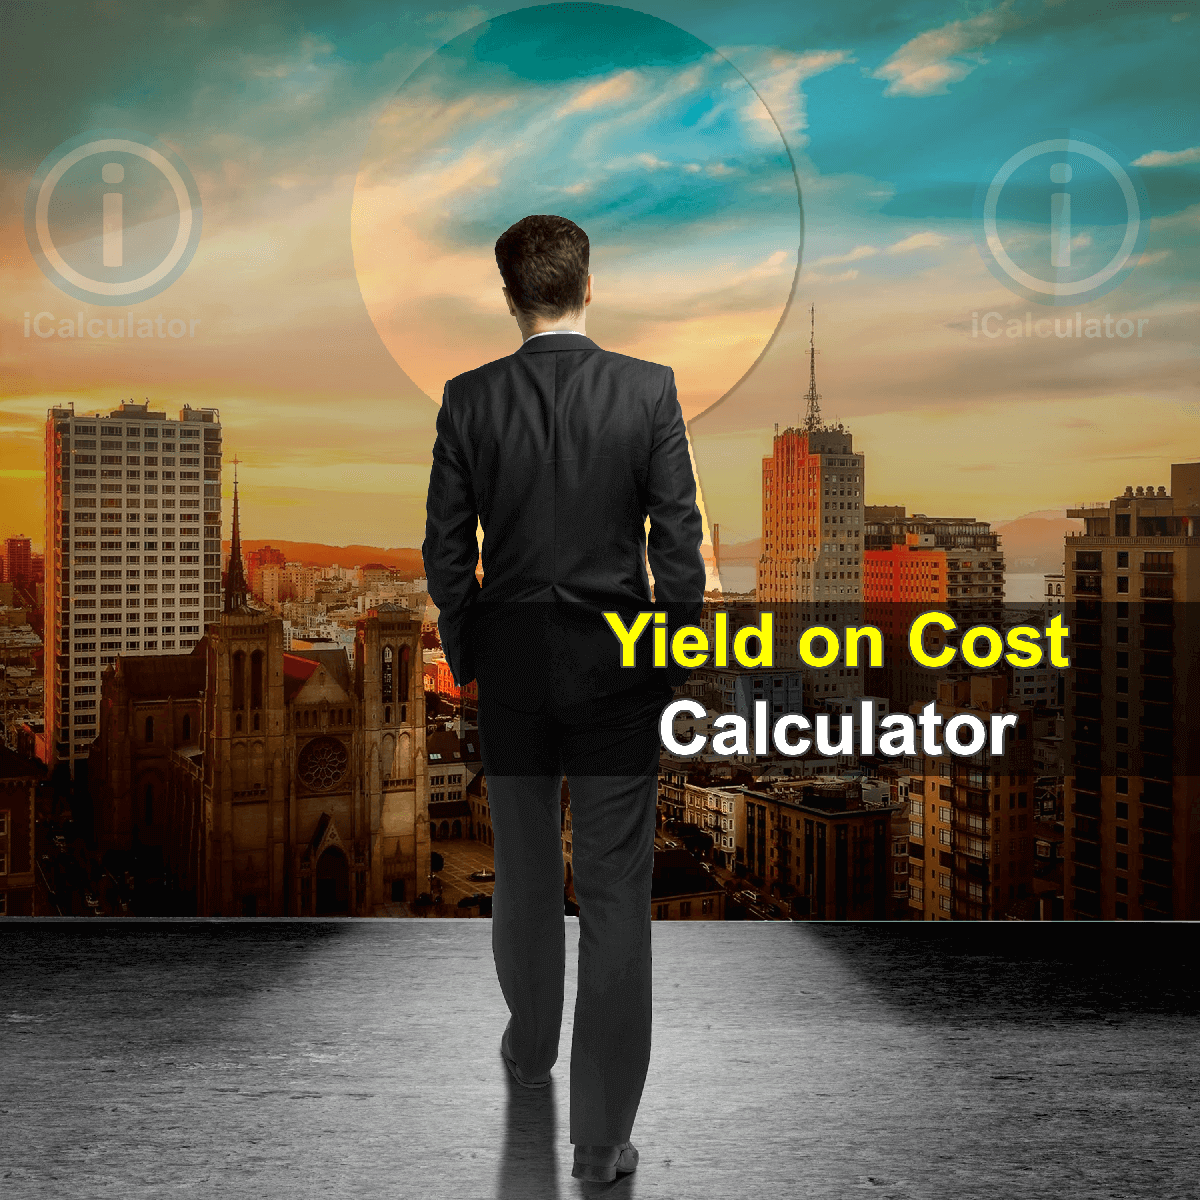 Yield on Cost Calculator. This image provides details of how to calculate Yield on Cost using a calculator and notepad. By using the Yield on Cost Ratio formula, the Yield on Cost Calculator provides a true calculation of the profitability of your investment portfolio